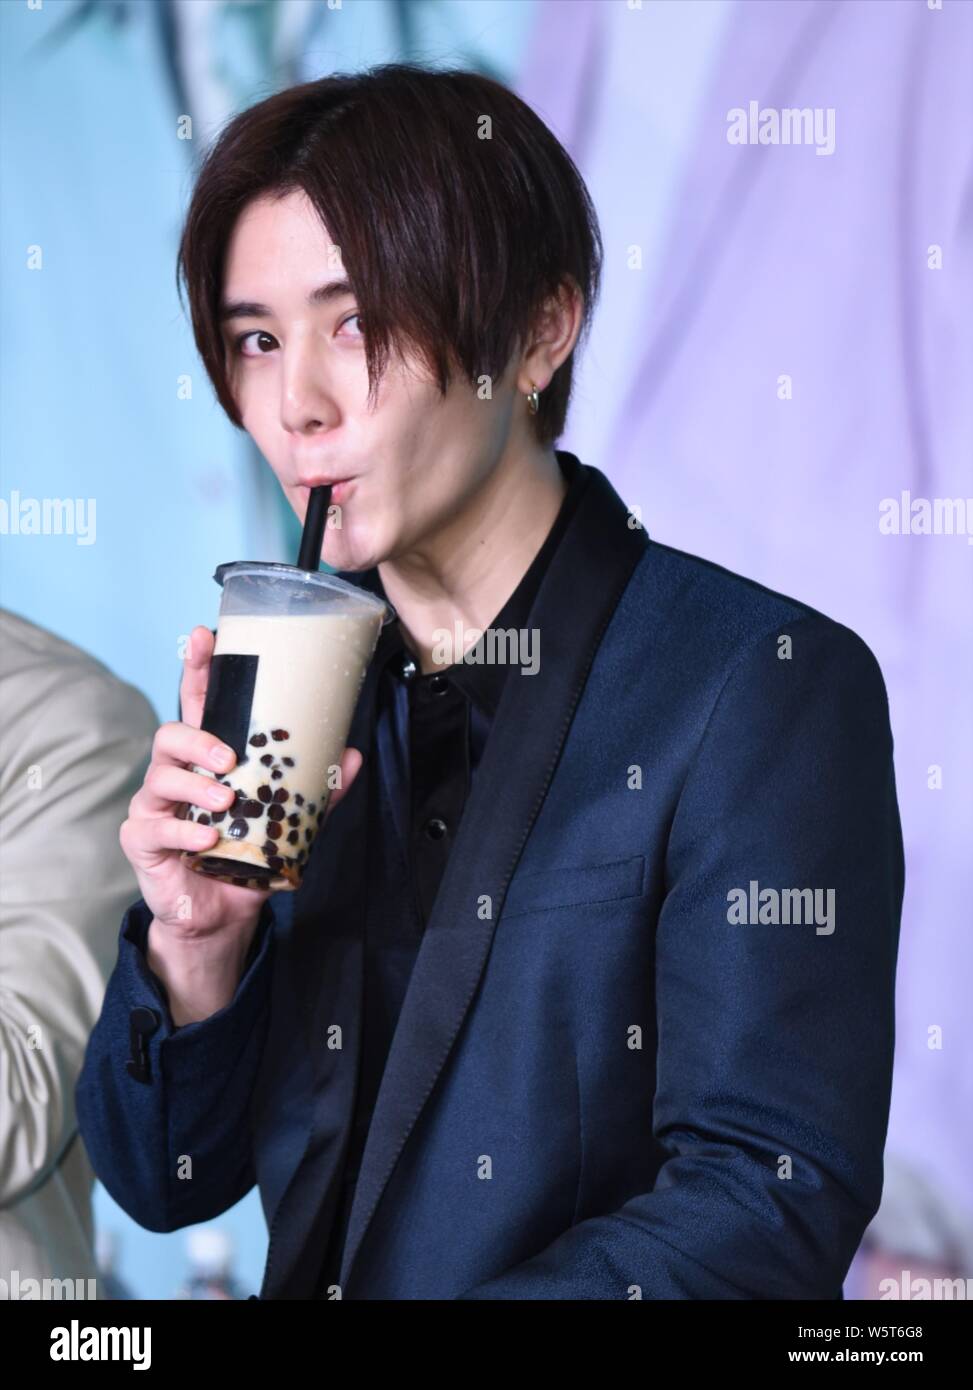 Ryosuke Yamada Of Japanese Boy Band Hey Say Jump Attends A Press Conference For The Hey Say Jump Live Tour 19 In Taipei Taiwan 14 June 19 Stock Photo Alamy